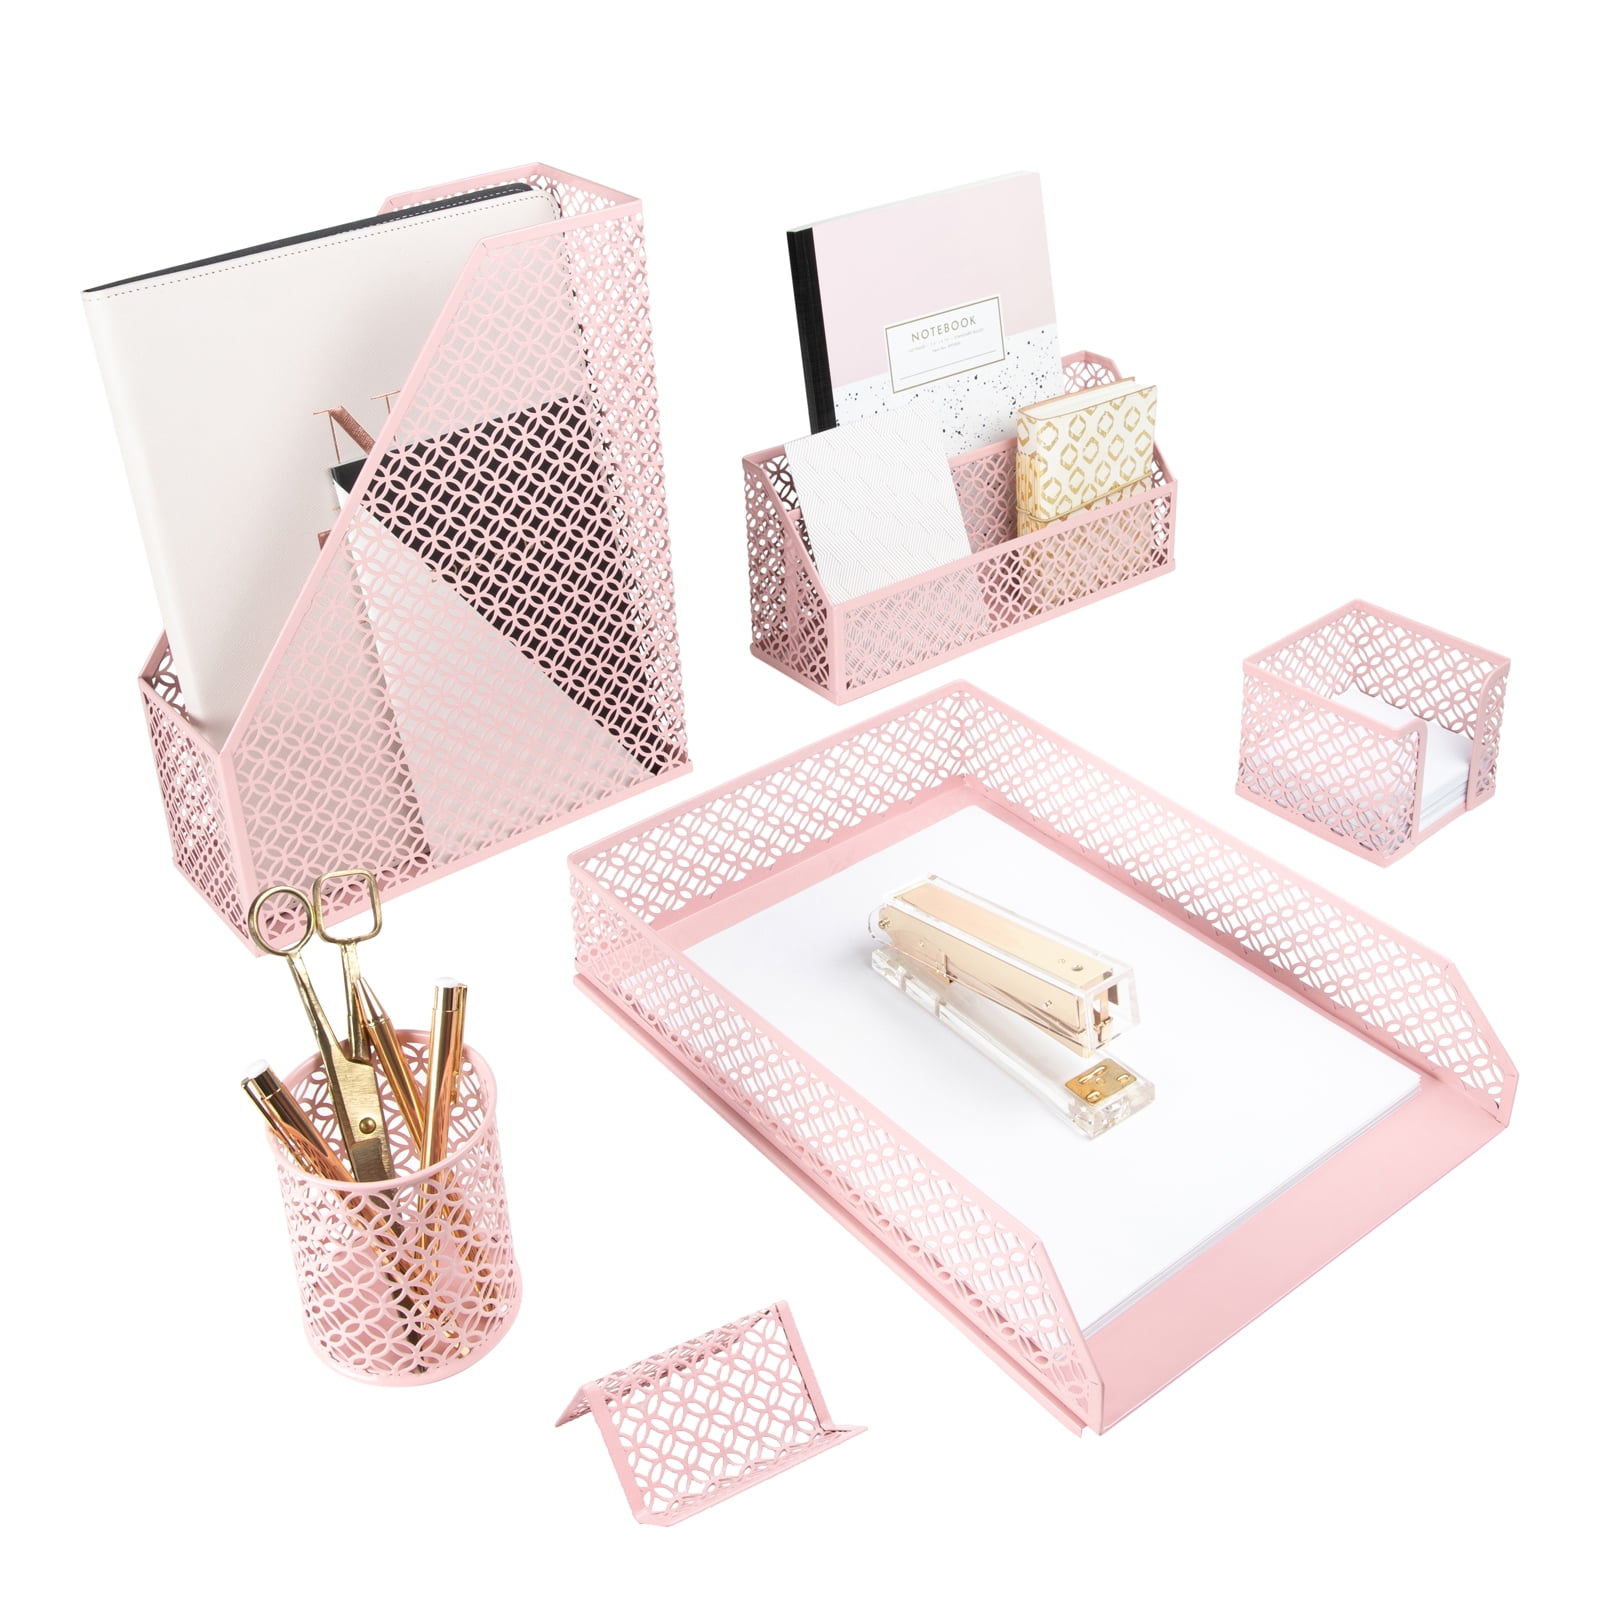 Buy hudstill 5 Piece Office Supplies Pink Desk Organizer Set in Stylish Art  Deco Design - Perfect Pink Desk Accessories and Room Decor for Cubicle,  Office, School or Home Office Desk for